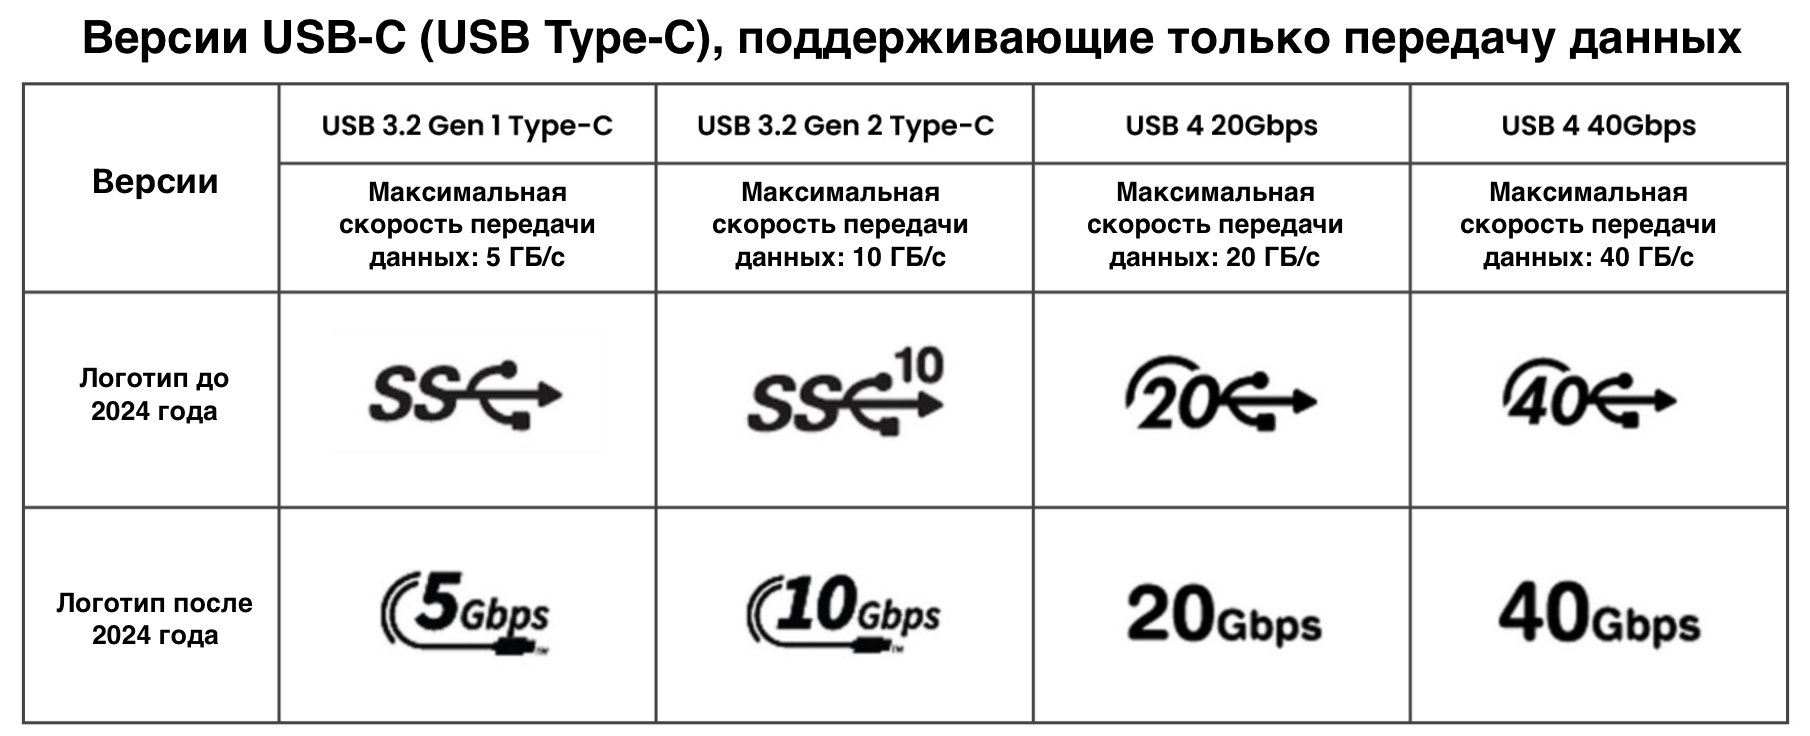 Distinguishing USB-C (USB Type-C) versions that support data transfer only from the logo